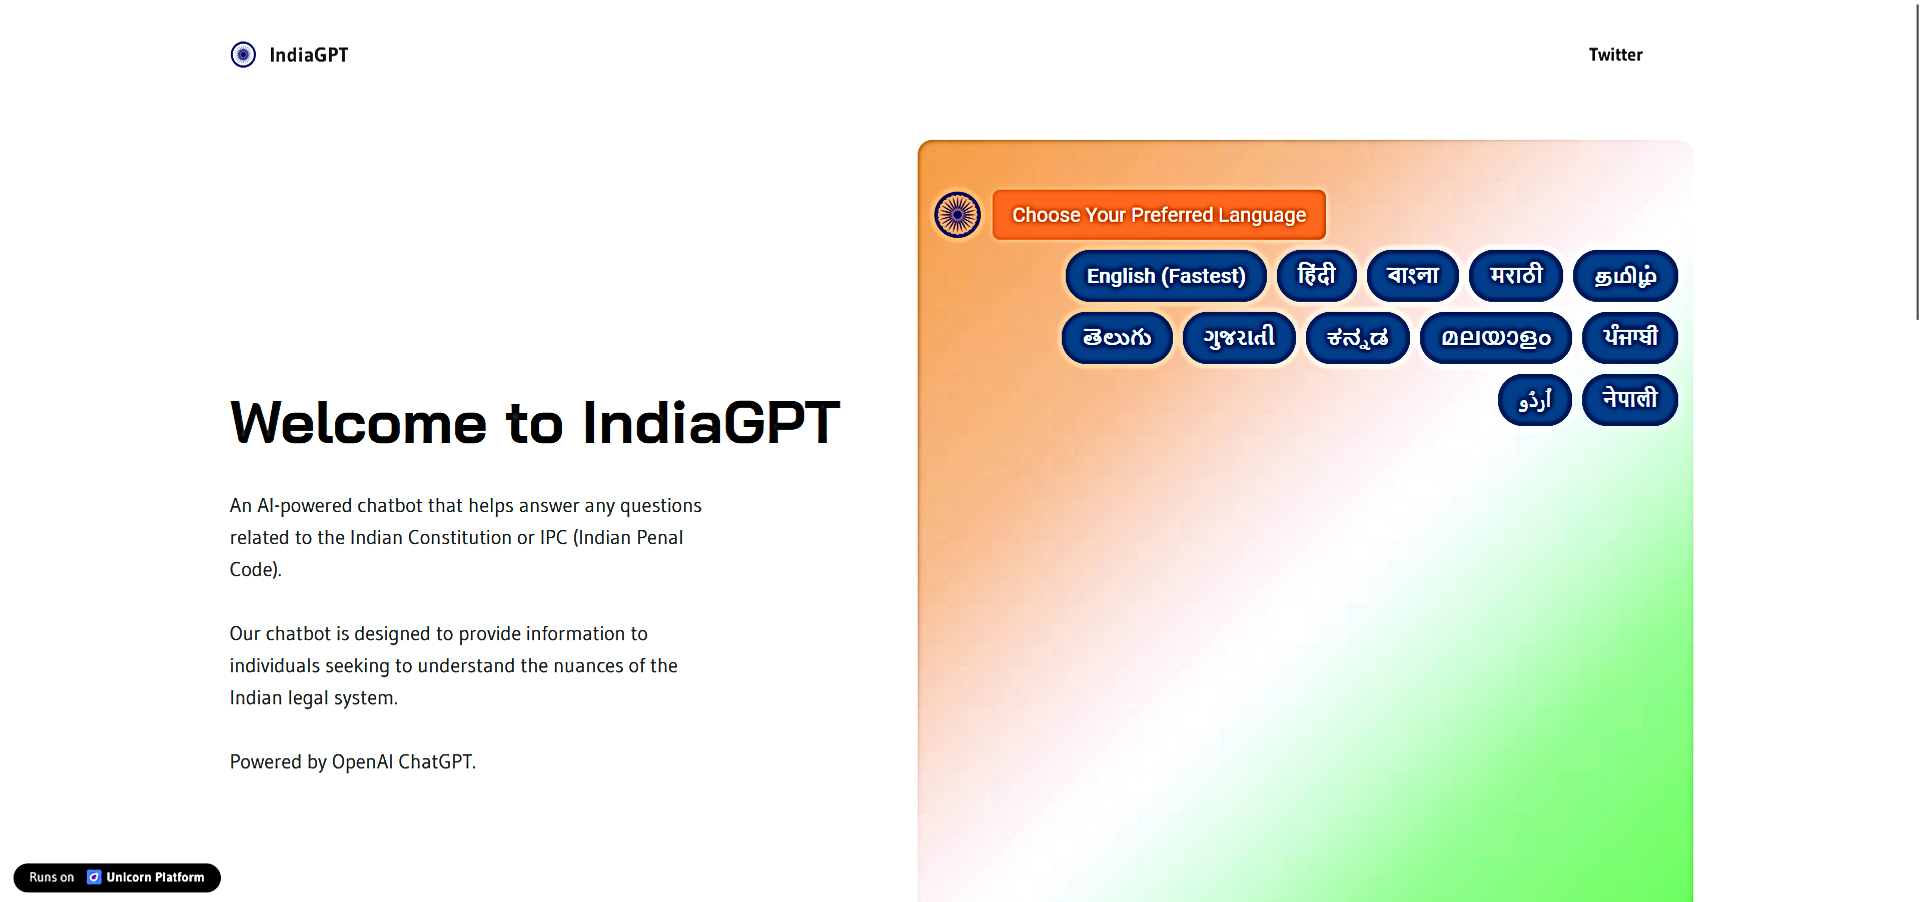 IndiaGPT featured